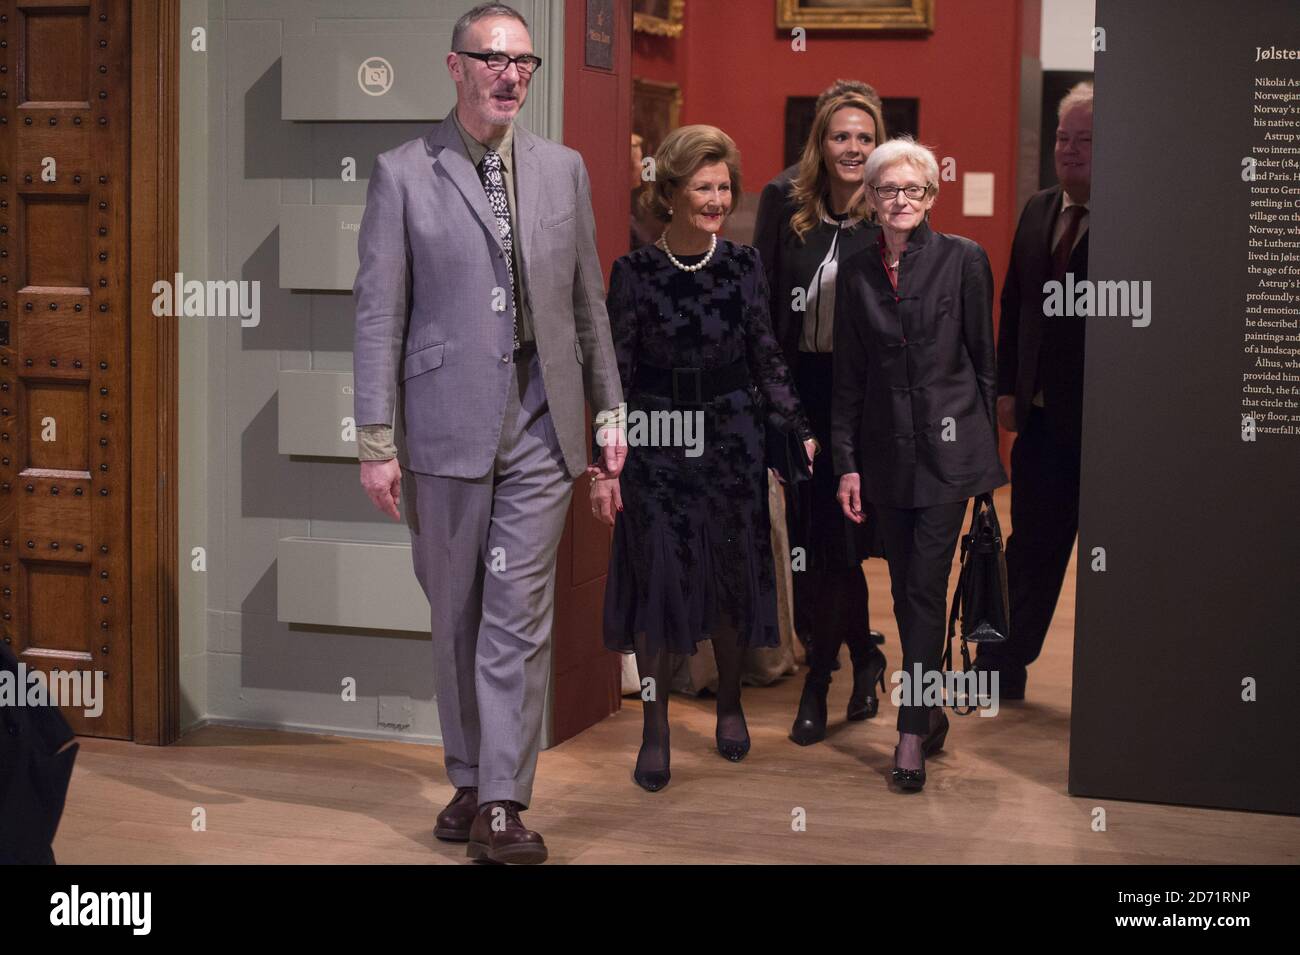 Her Majesty Queen Sonja of Norway pictured during a visit to the Nikolai Astrup exhibition, at Dulwich Picture Gallery in south London. Stock Photo